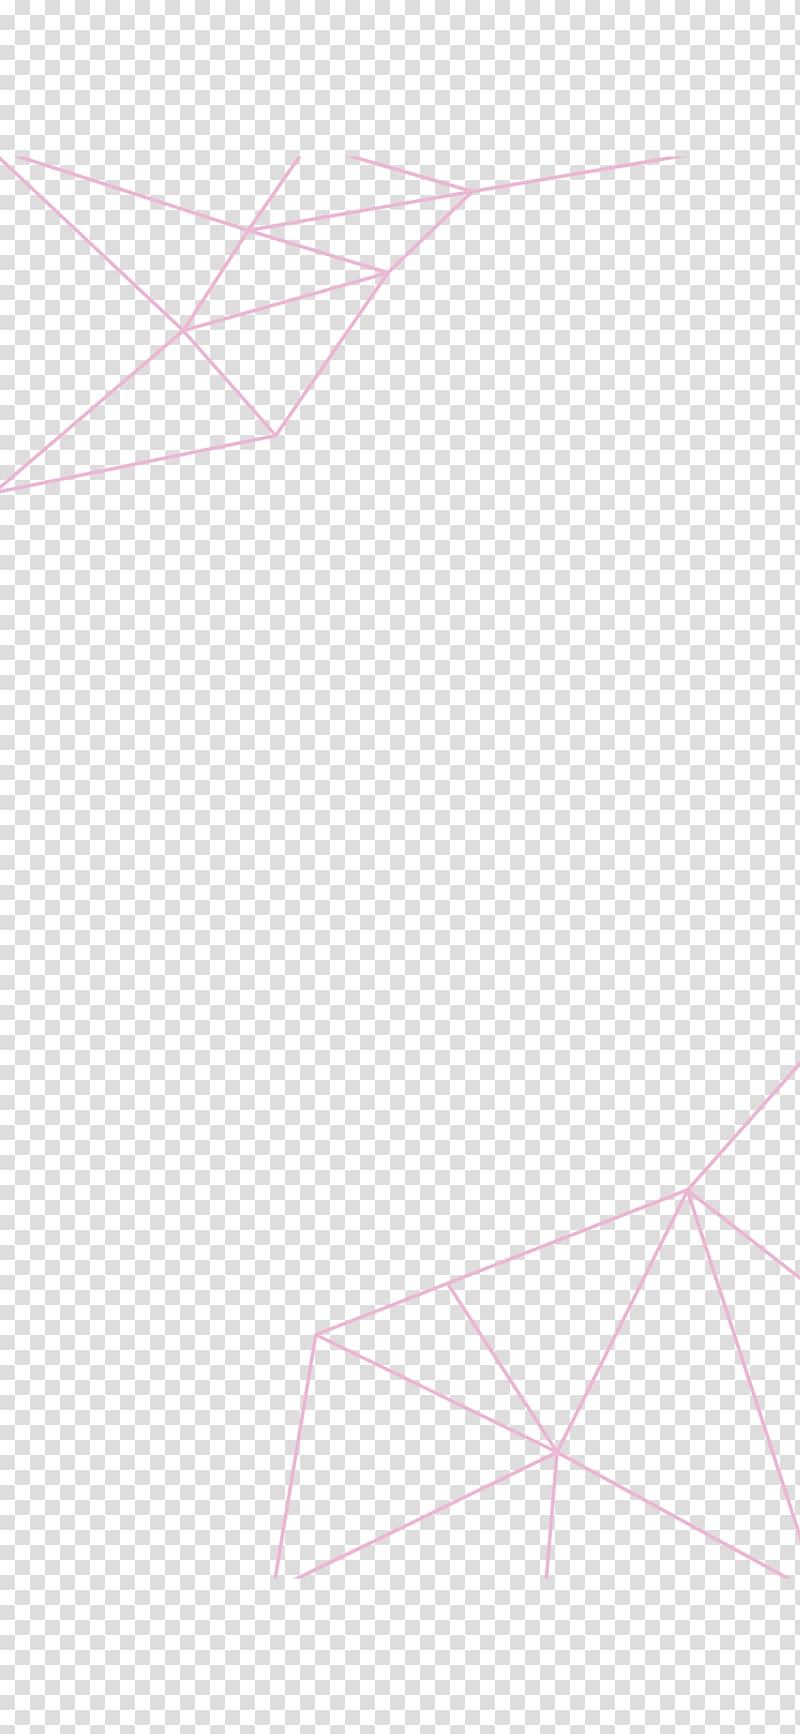 Triangle WeddingWire , snapchat pink transparent background PNG clipart